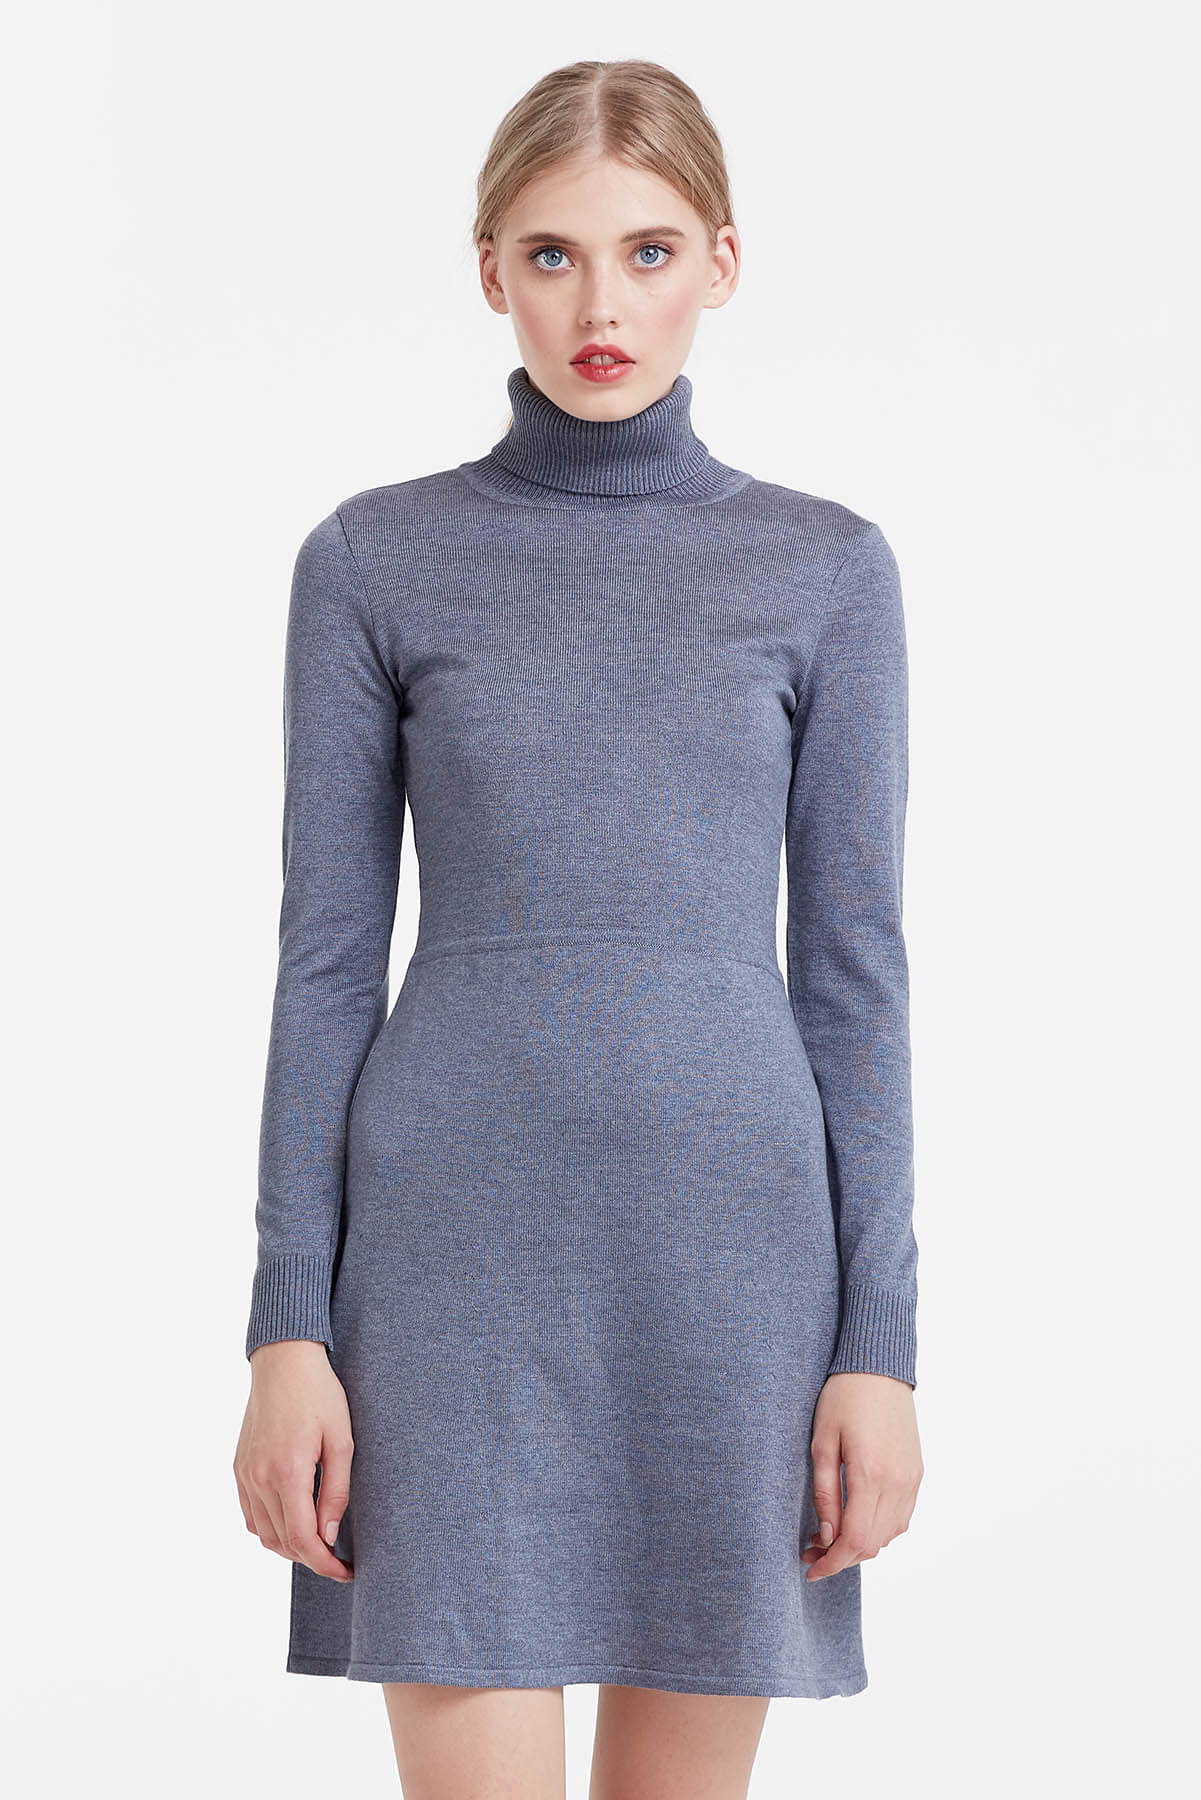 Grey knitted dress , photo 1